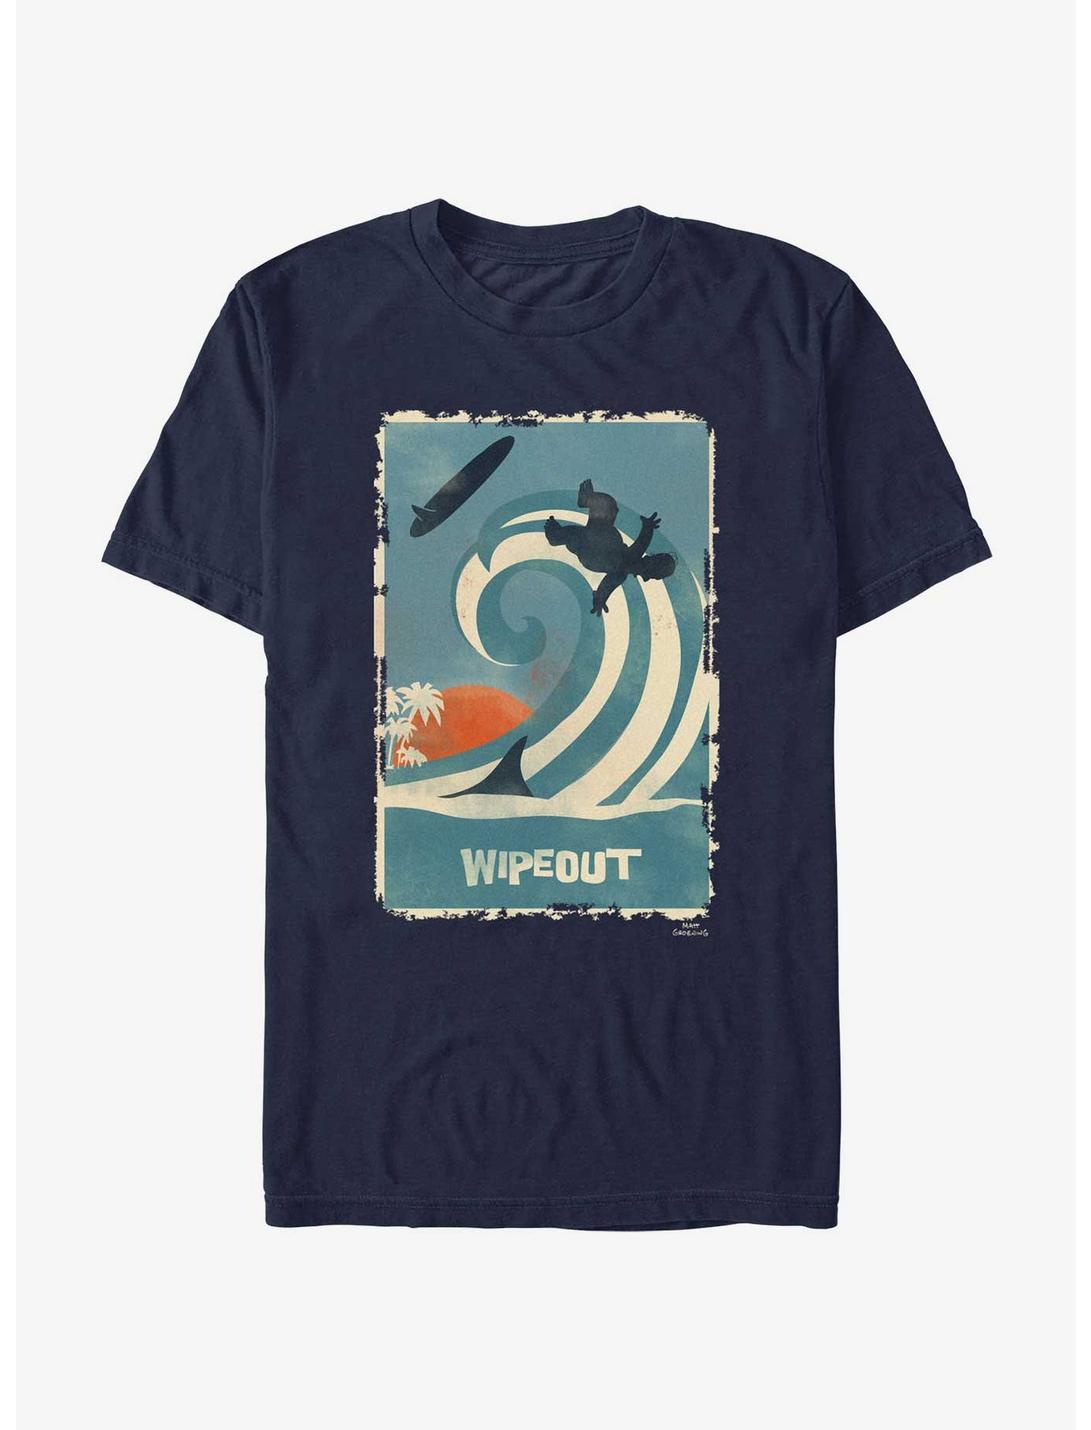 The Simpsons Wipeout Poster T-Shirt, NAVY, hi-res